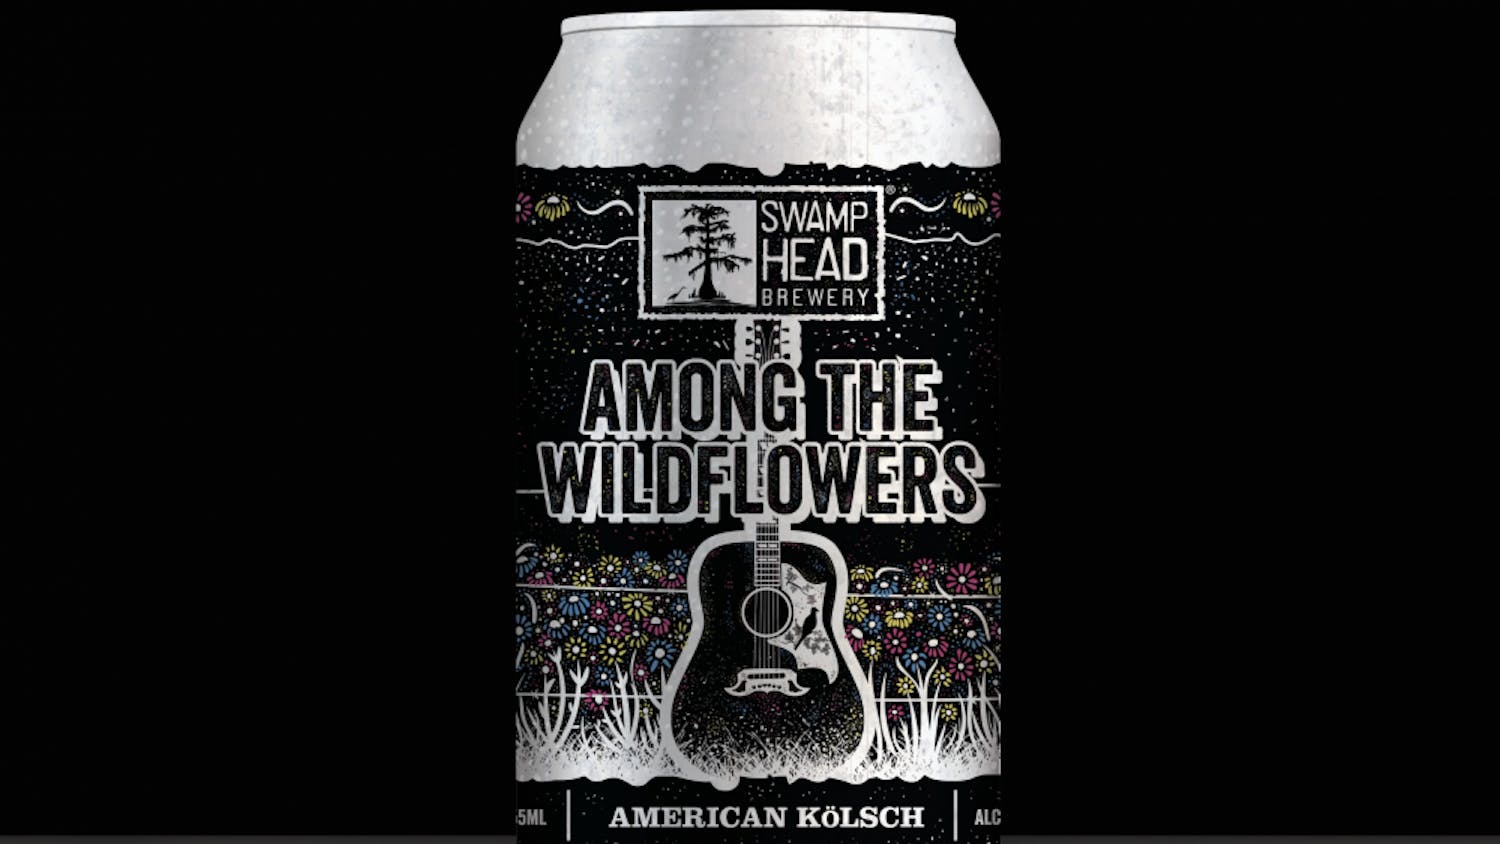 The can for the new Tom Petty-inspired beer.